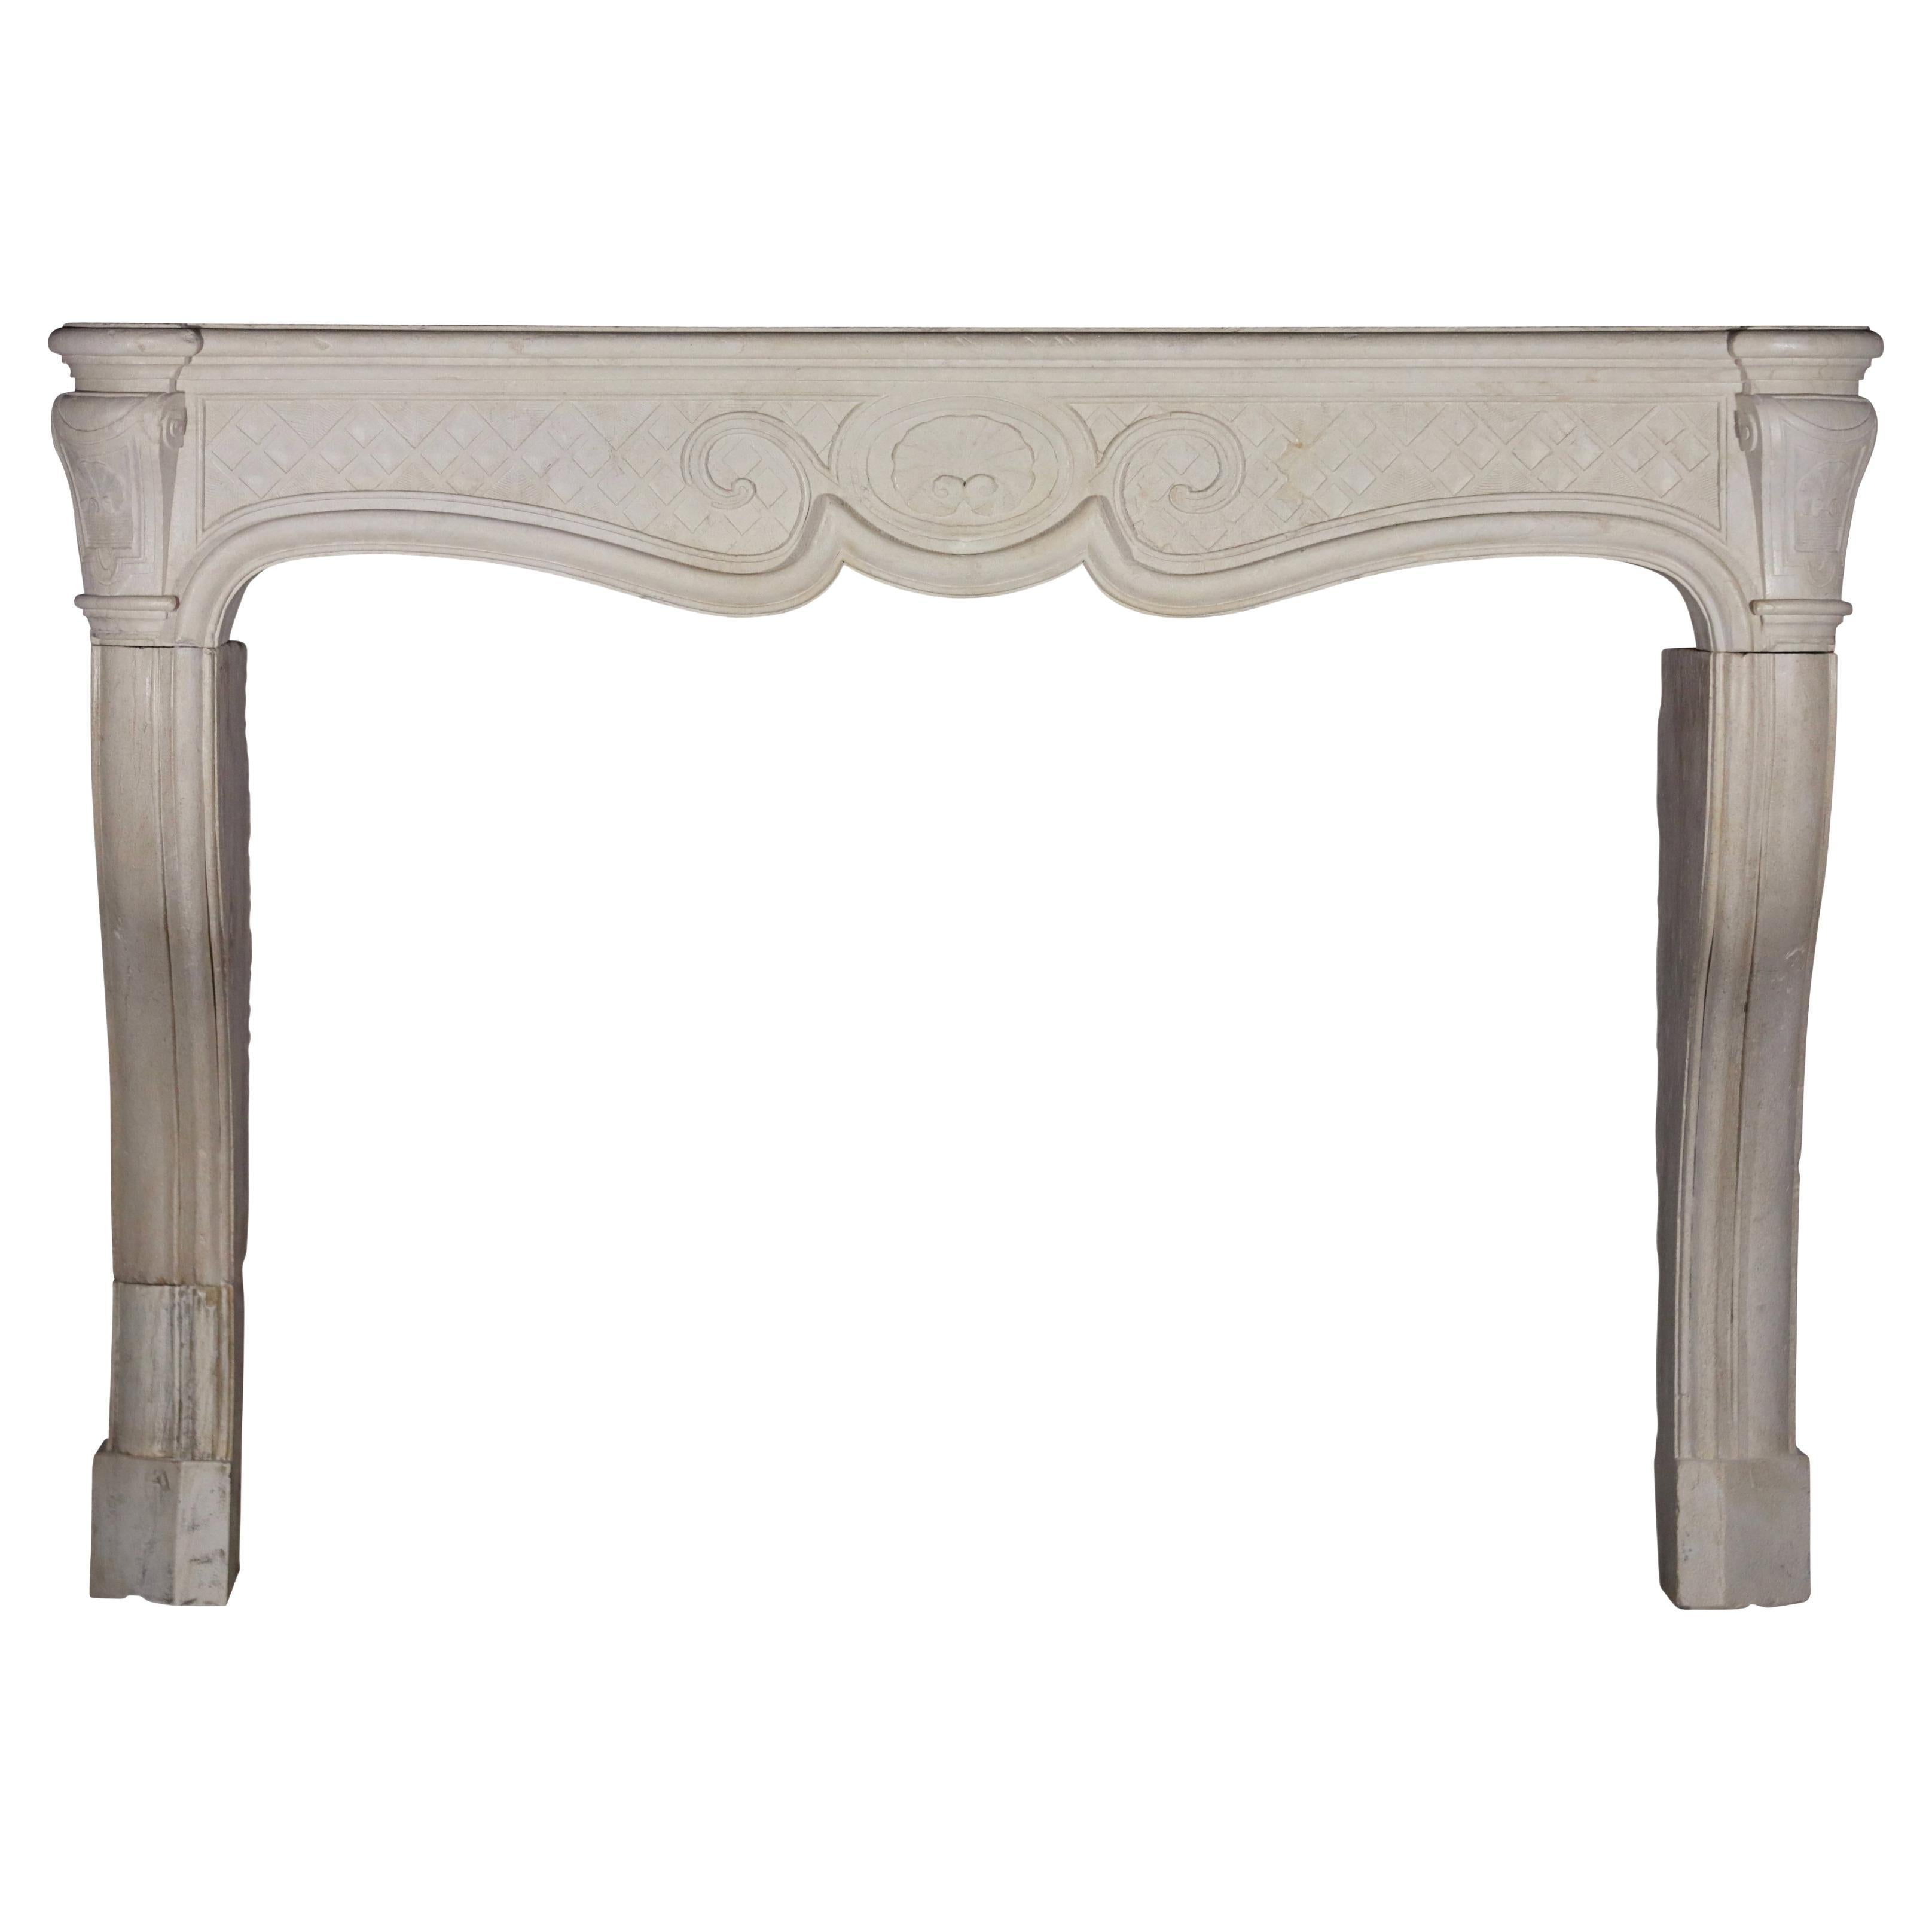 This stunning French limestone antique fireplace surround has a very fine carving and comes from a French country house. It has side pieces for an upper mantle. It is end Regency period, 18th century.
Measures:
168 cm Exterior Width 66,14 Inch
143